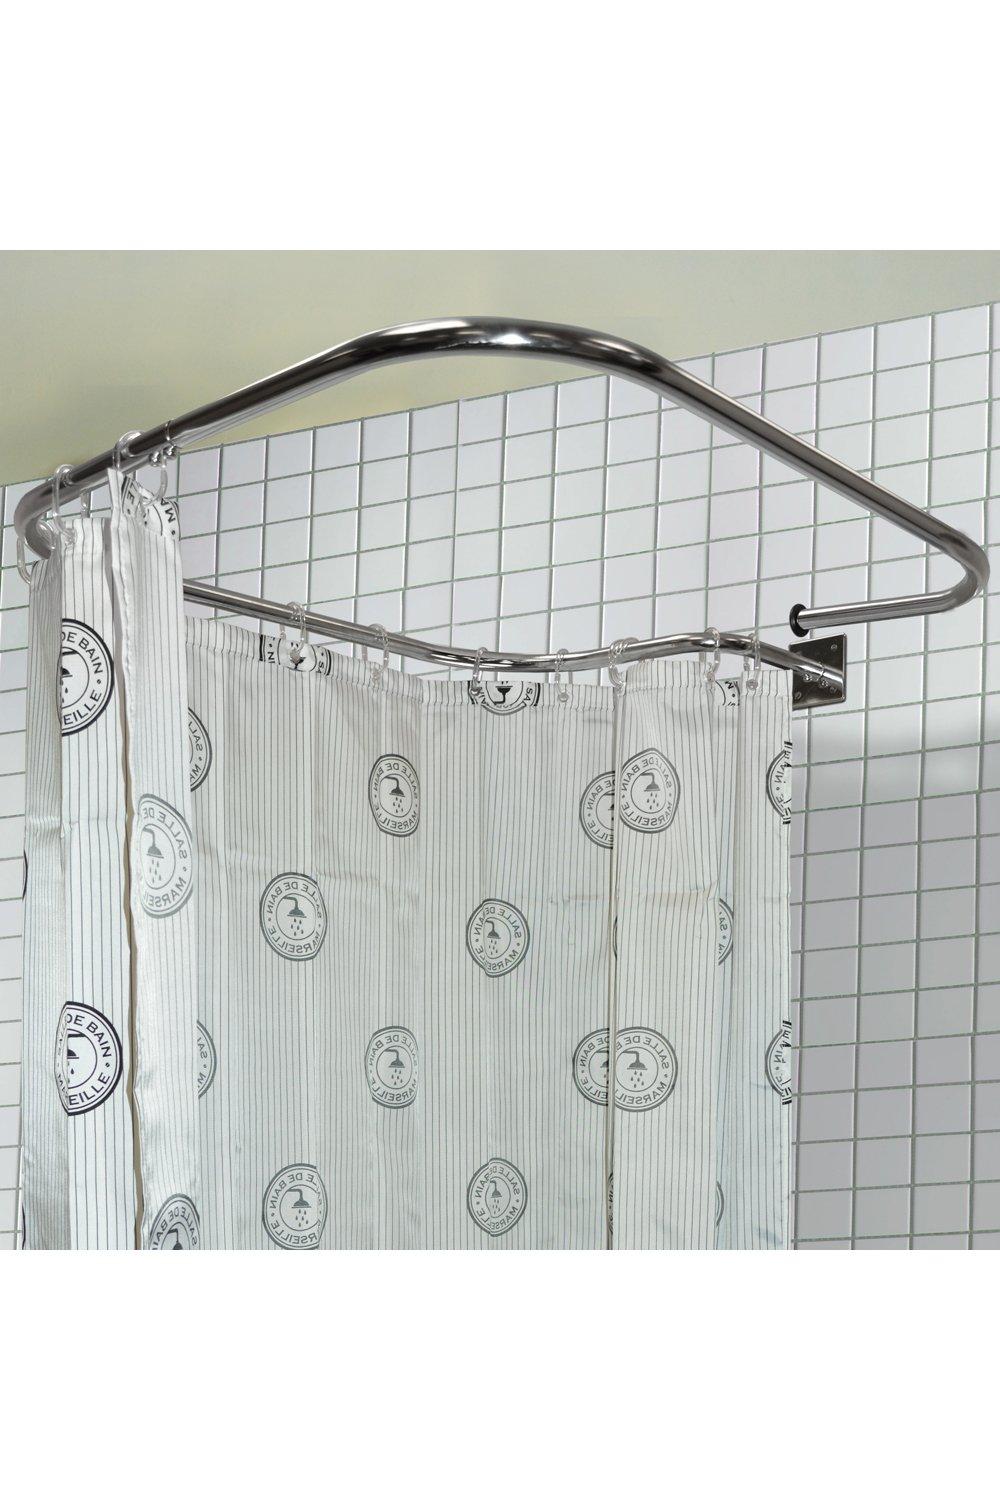 WATSONS 'Loop' Square  Stainless Steel Rectangular Shower Rail And Curtain Rings|silver